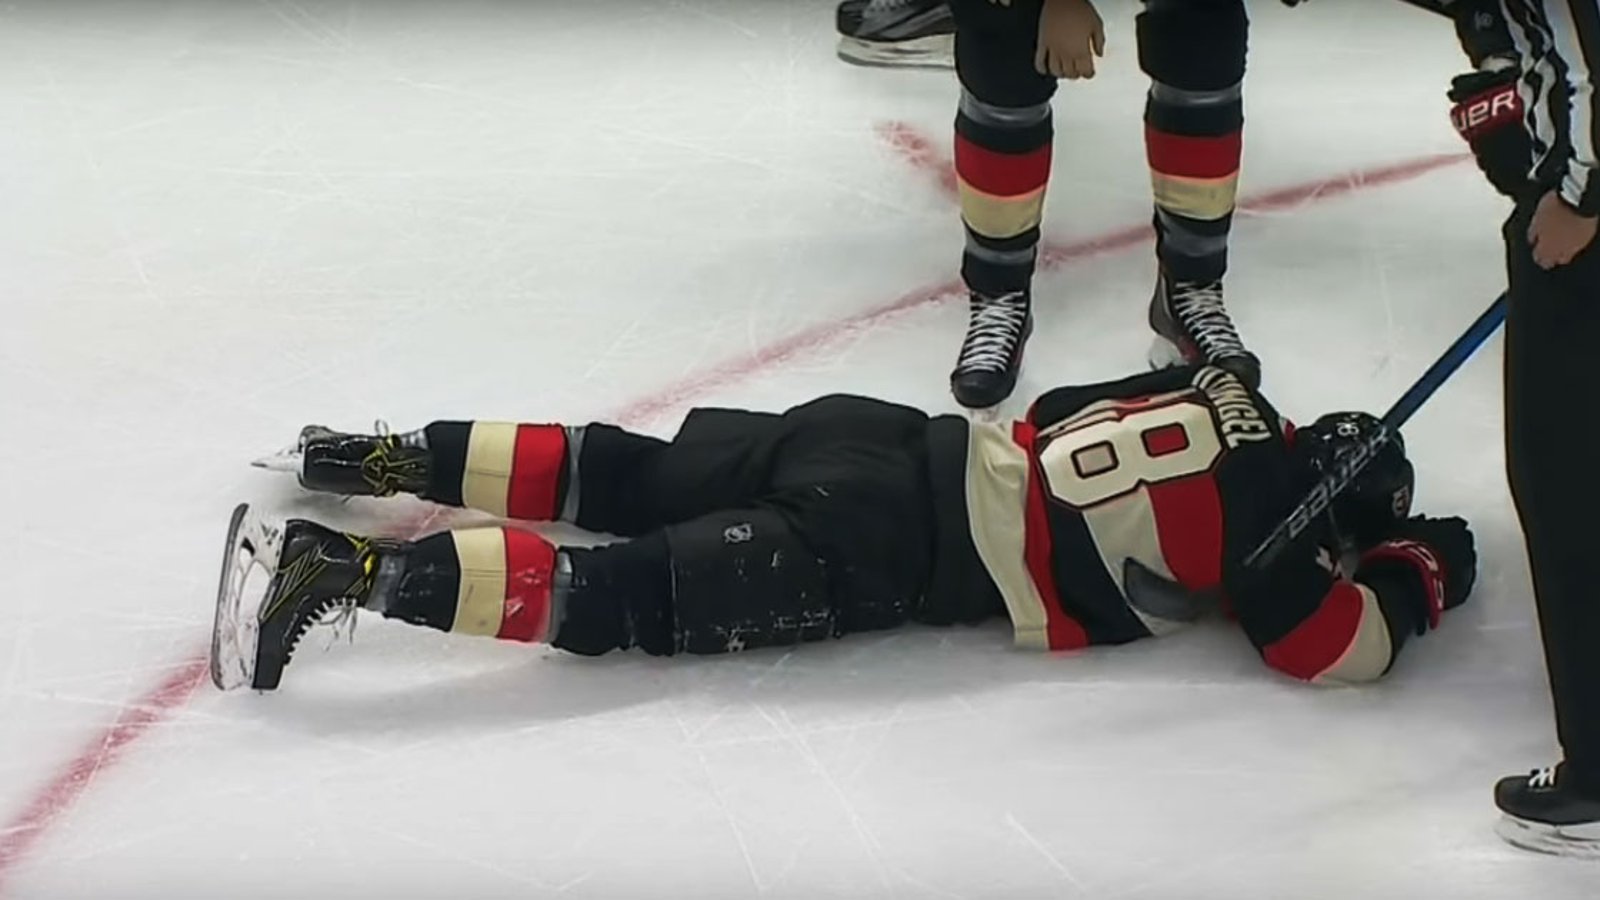 VIDEO: Scary moment as Karlsson hits his teammate with a slapshot